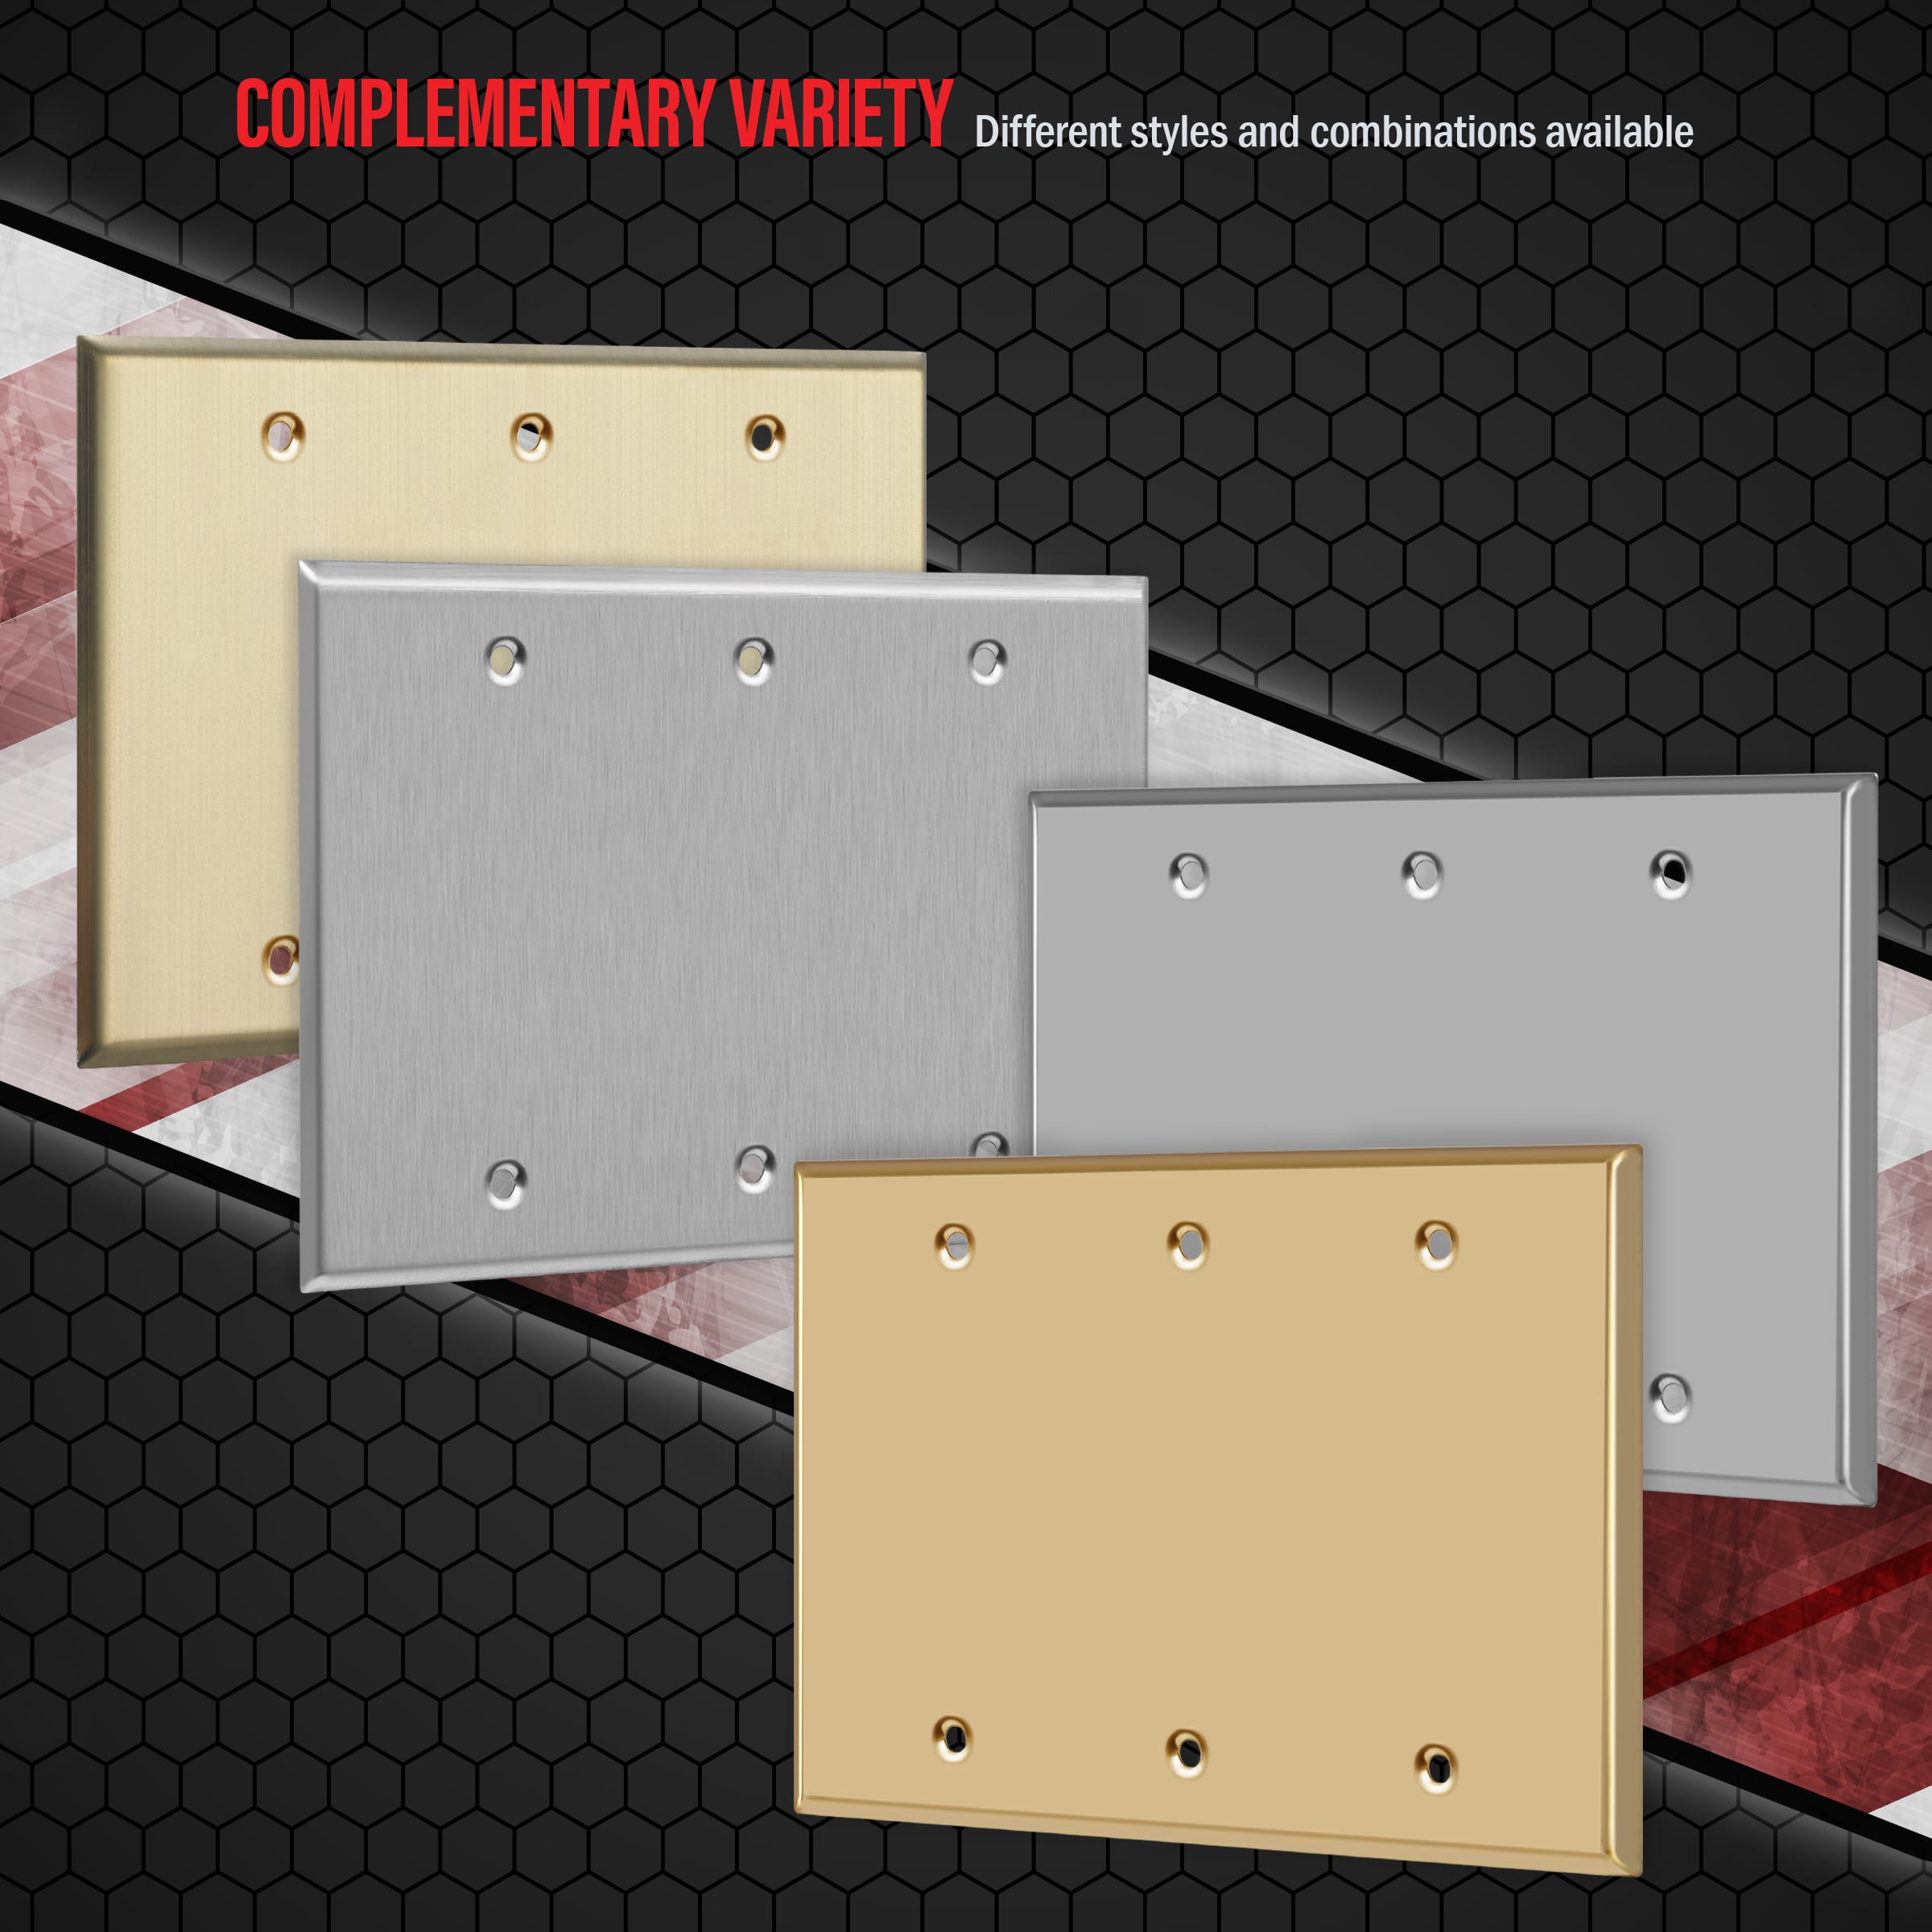 3-Gang Stainless Steel Blank Wall Plate